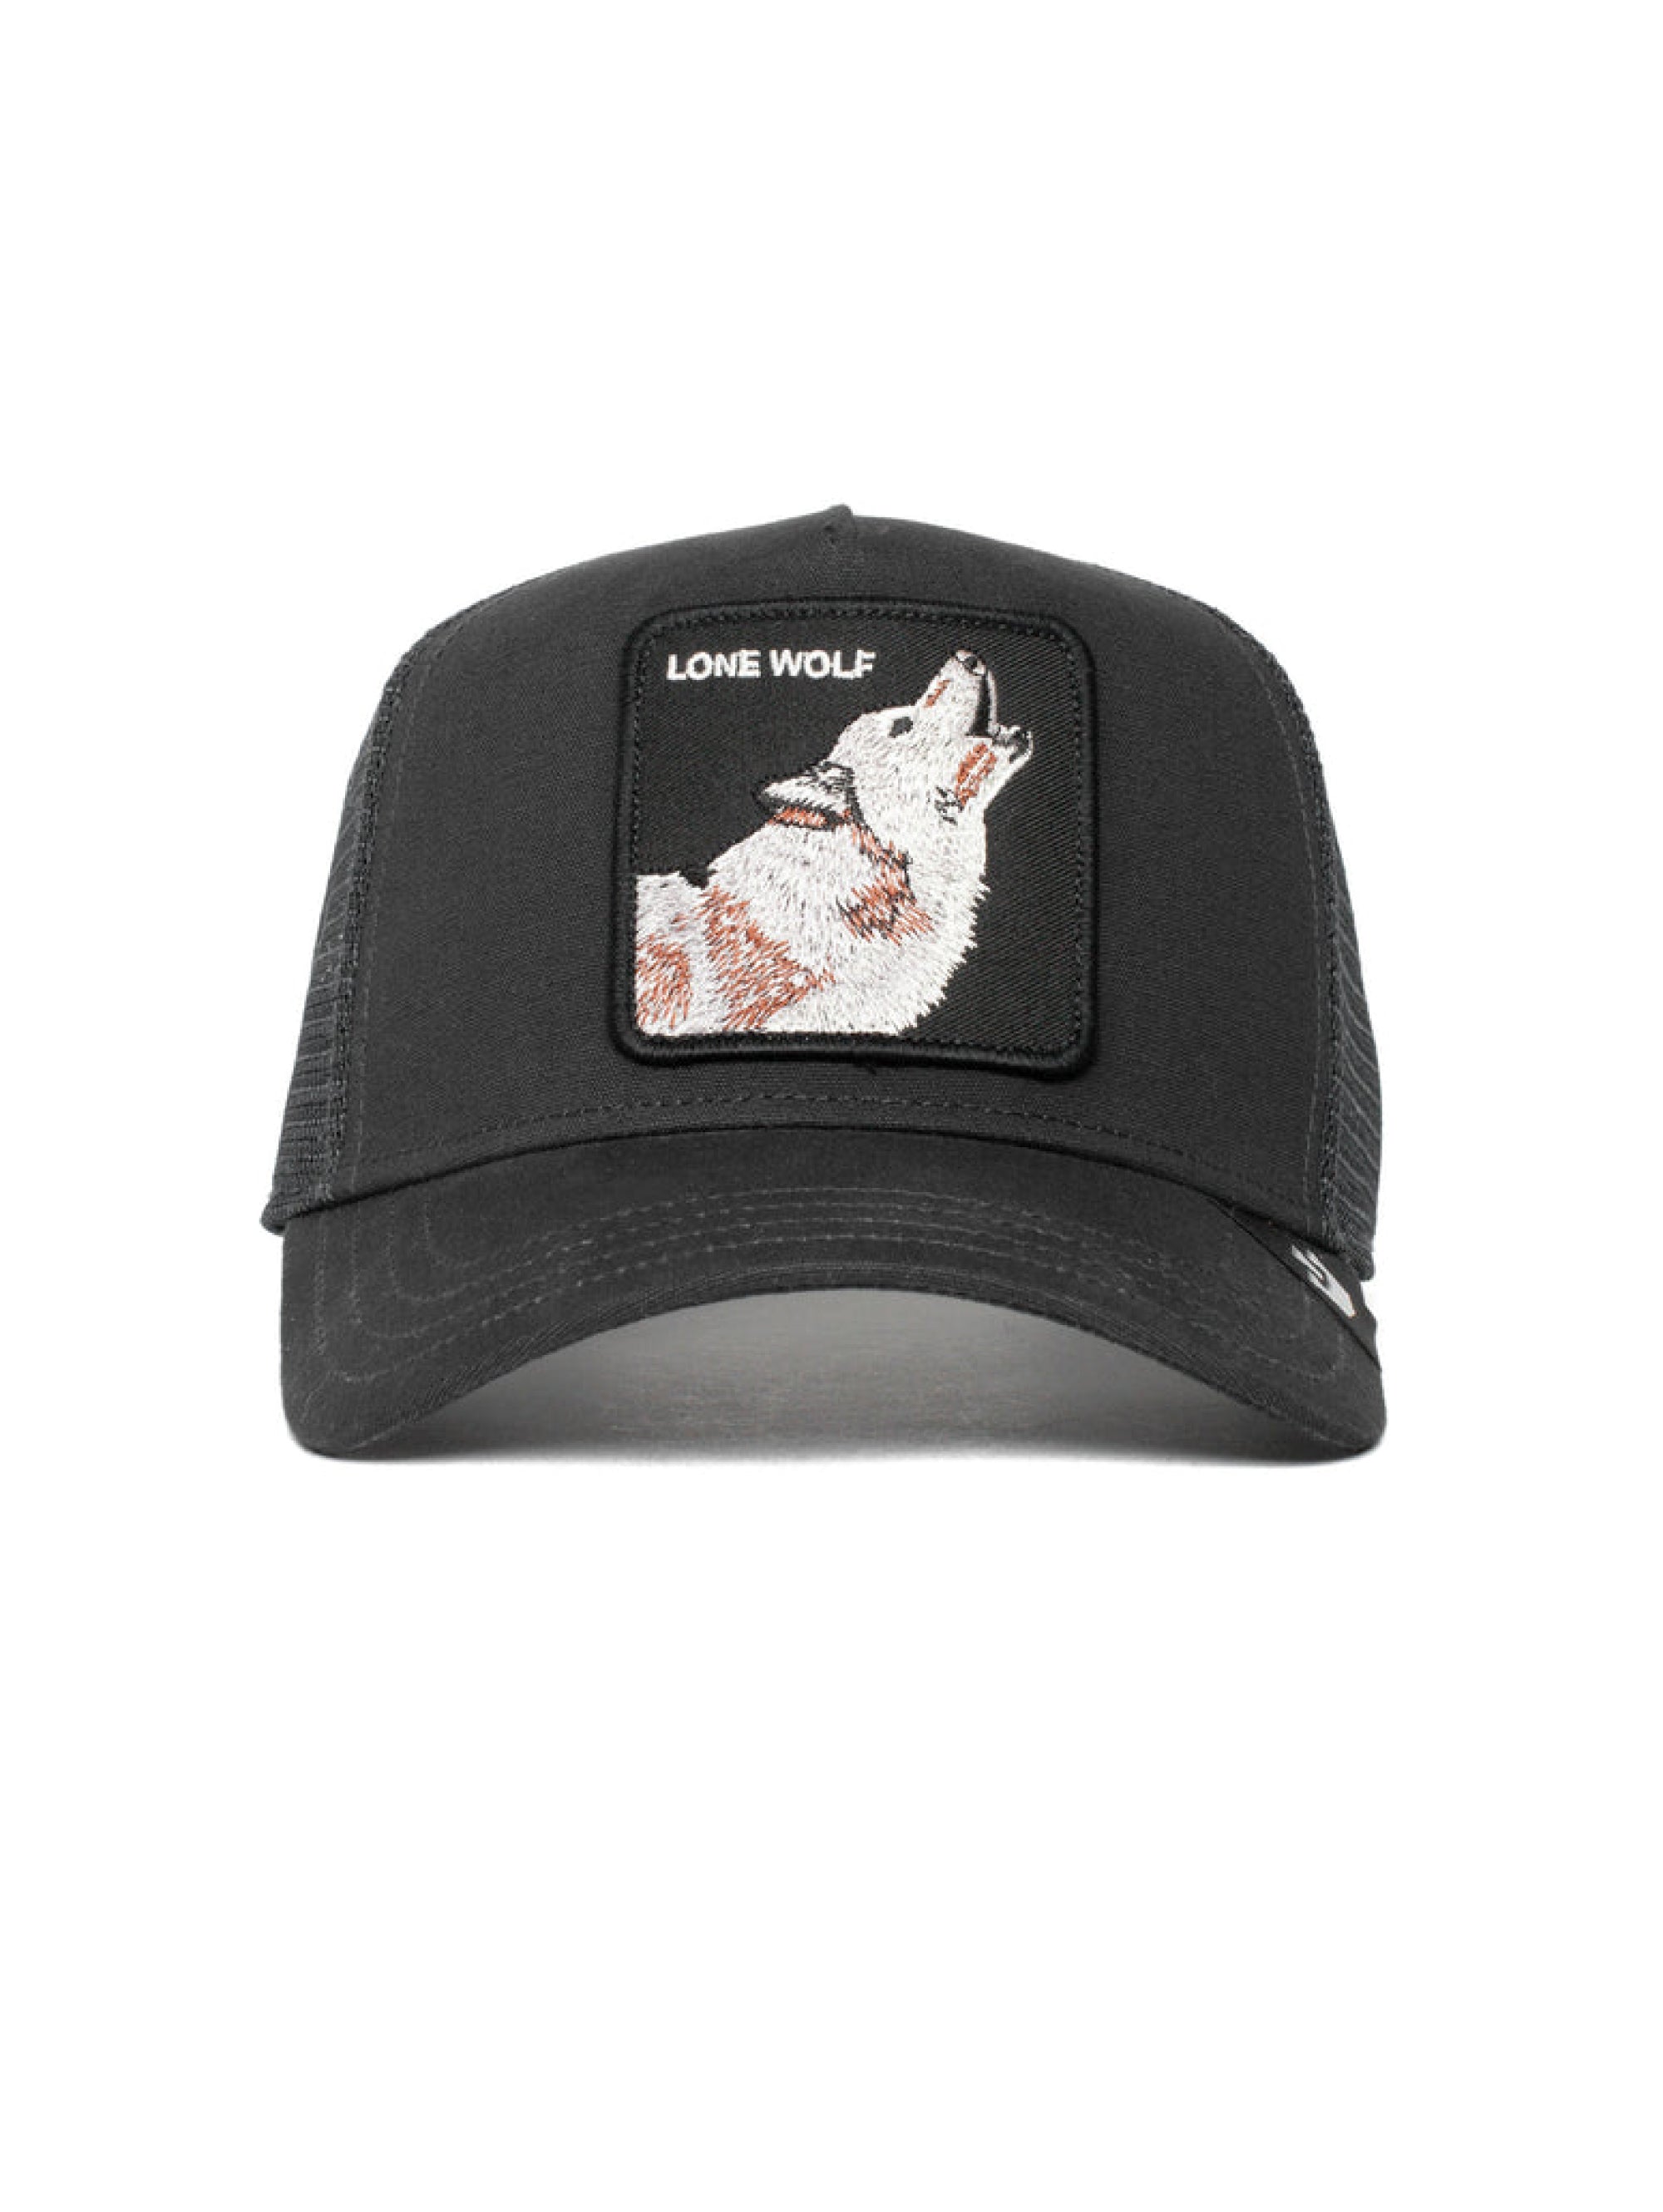 GOORIN BROS-Cappello Trucker con Patch The Lone Wolf-TRYME Shop